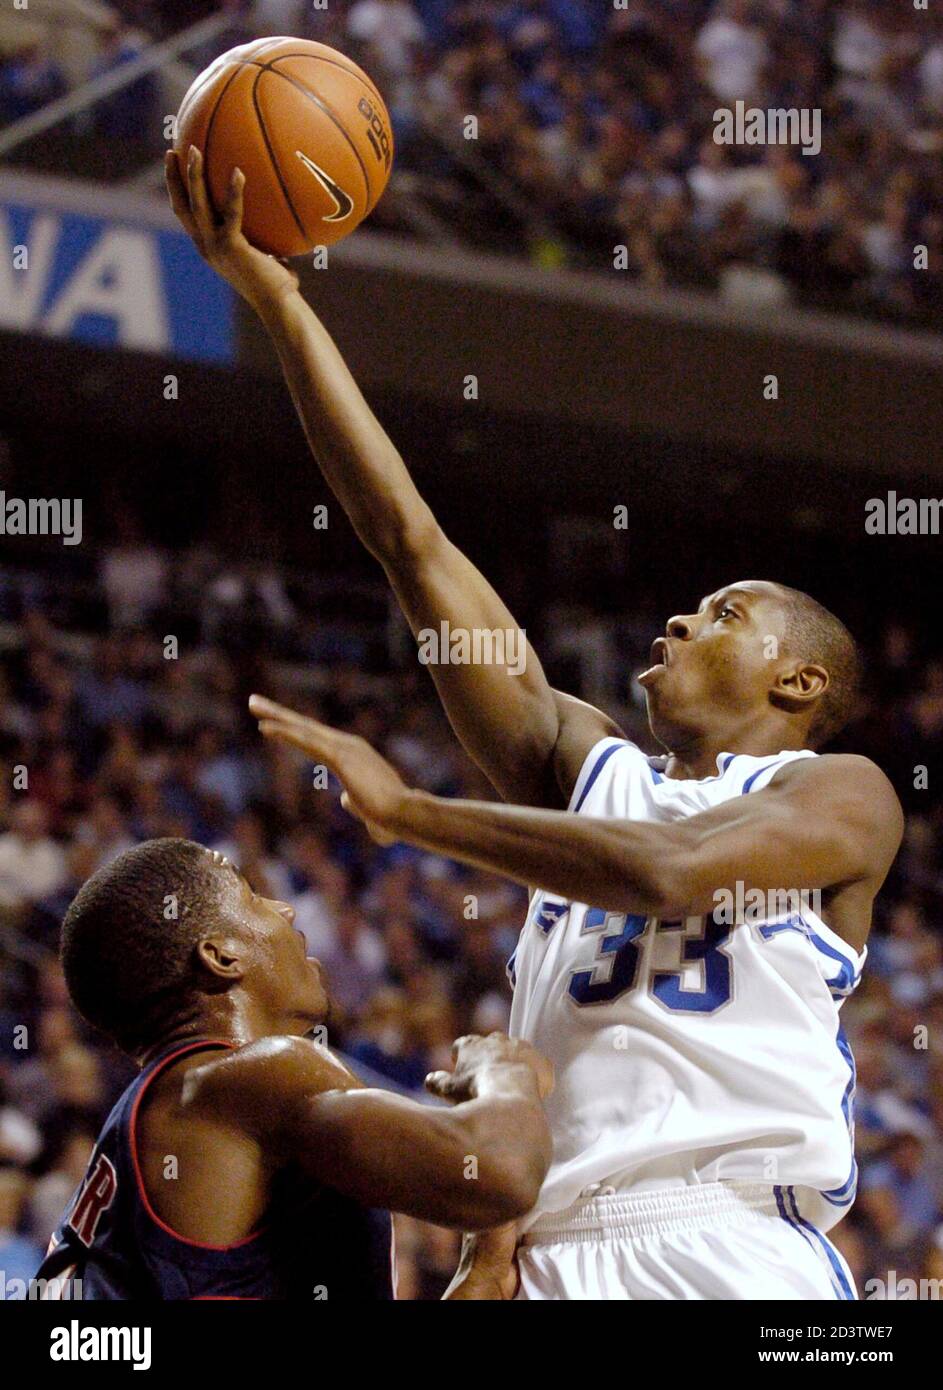 University of Kentucky's Antwain Barbour (R) drives the lane overtop Ole  Miss's Aaron Harper (L) during the first half of play at Rupp Arena in  Lexington, Kentucky, January 28, 2004. REUTERS/ John